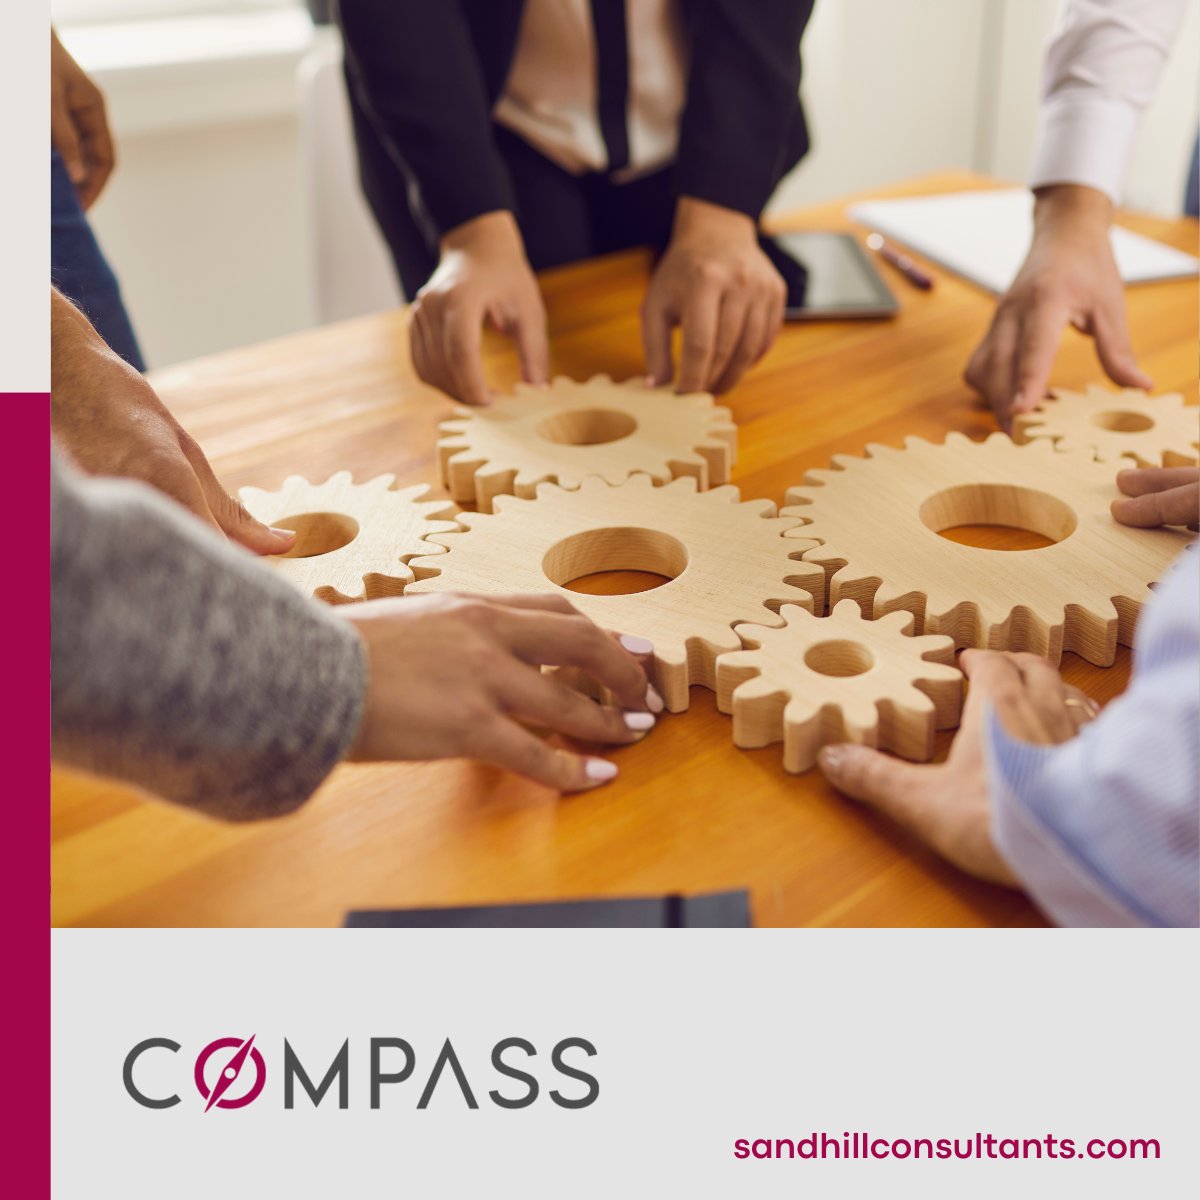 Revolutionize your Data Governance practices! See how COMPASS is reshaping the landscape for mid-sized companies by tackling data governance challenges head-on, streamlining processes, ensuring compliance, and enhancing collaboration. ow.ly/aXNG50R2cIJ